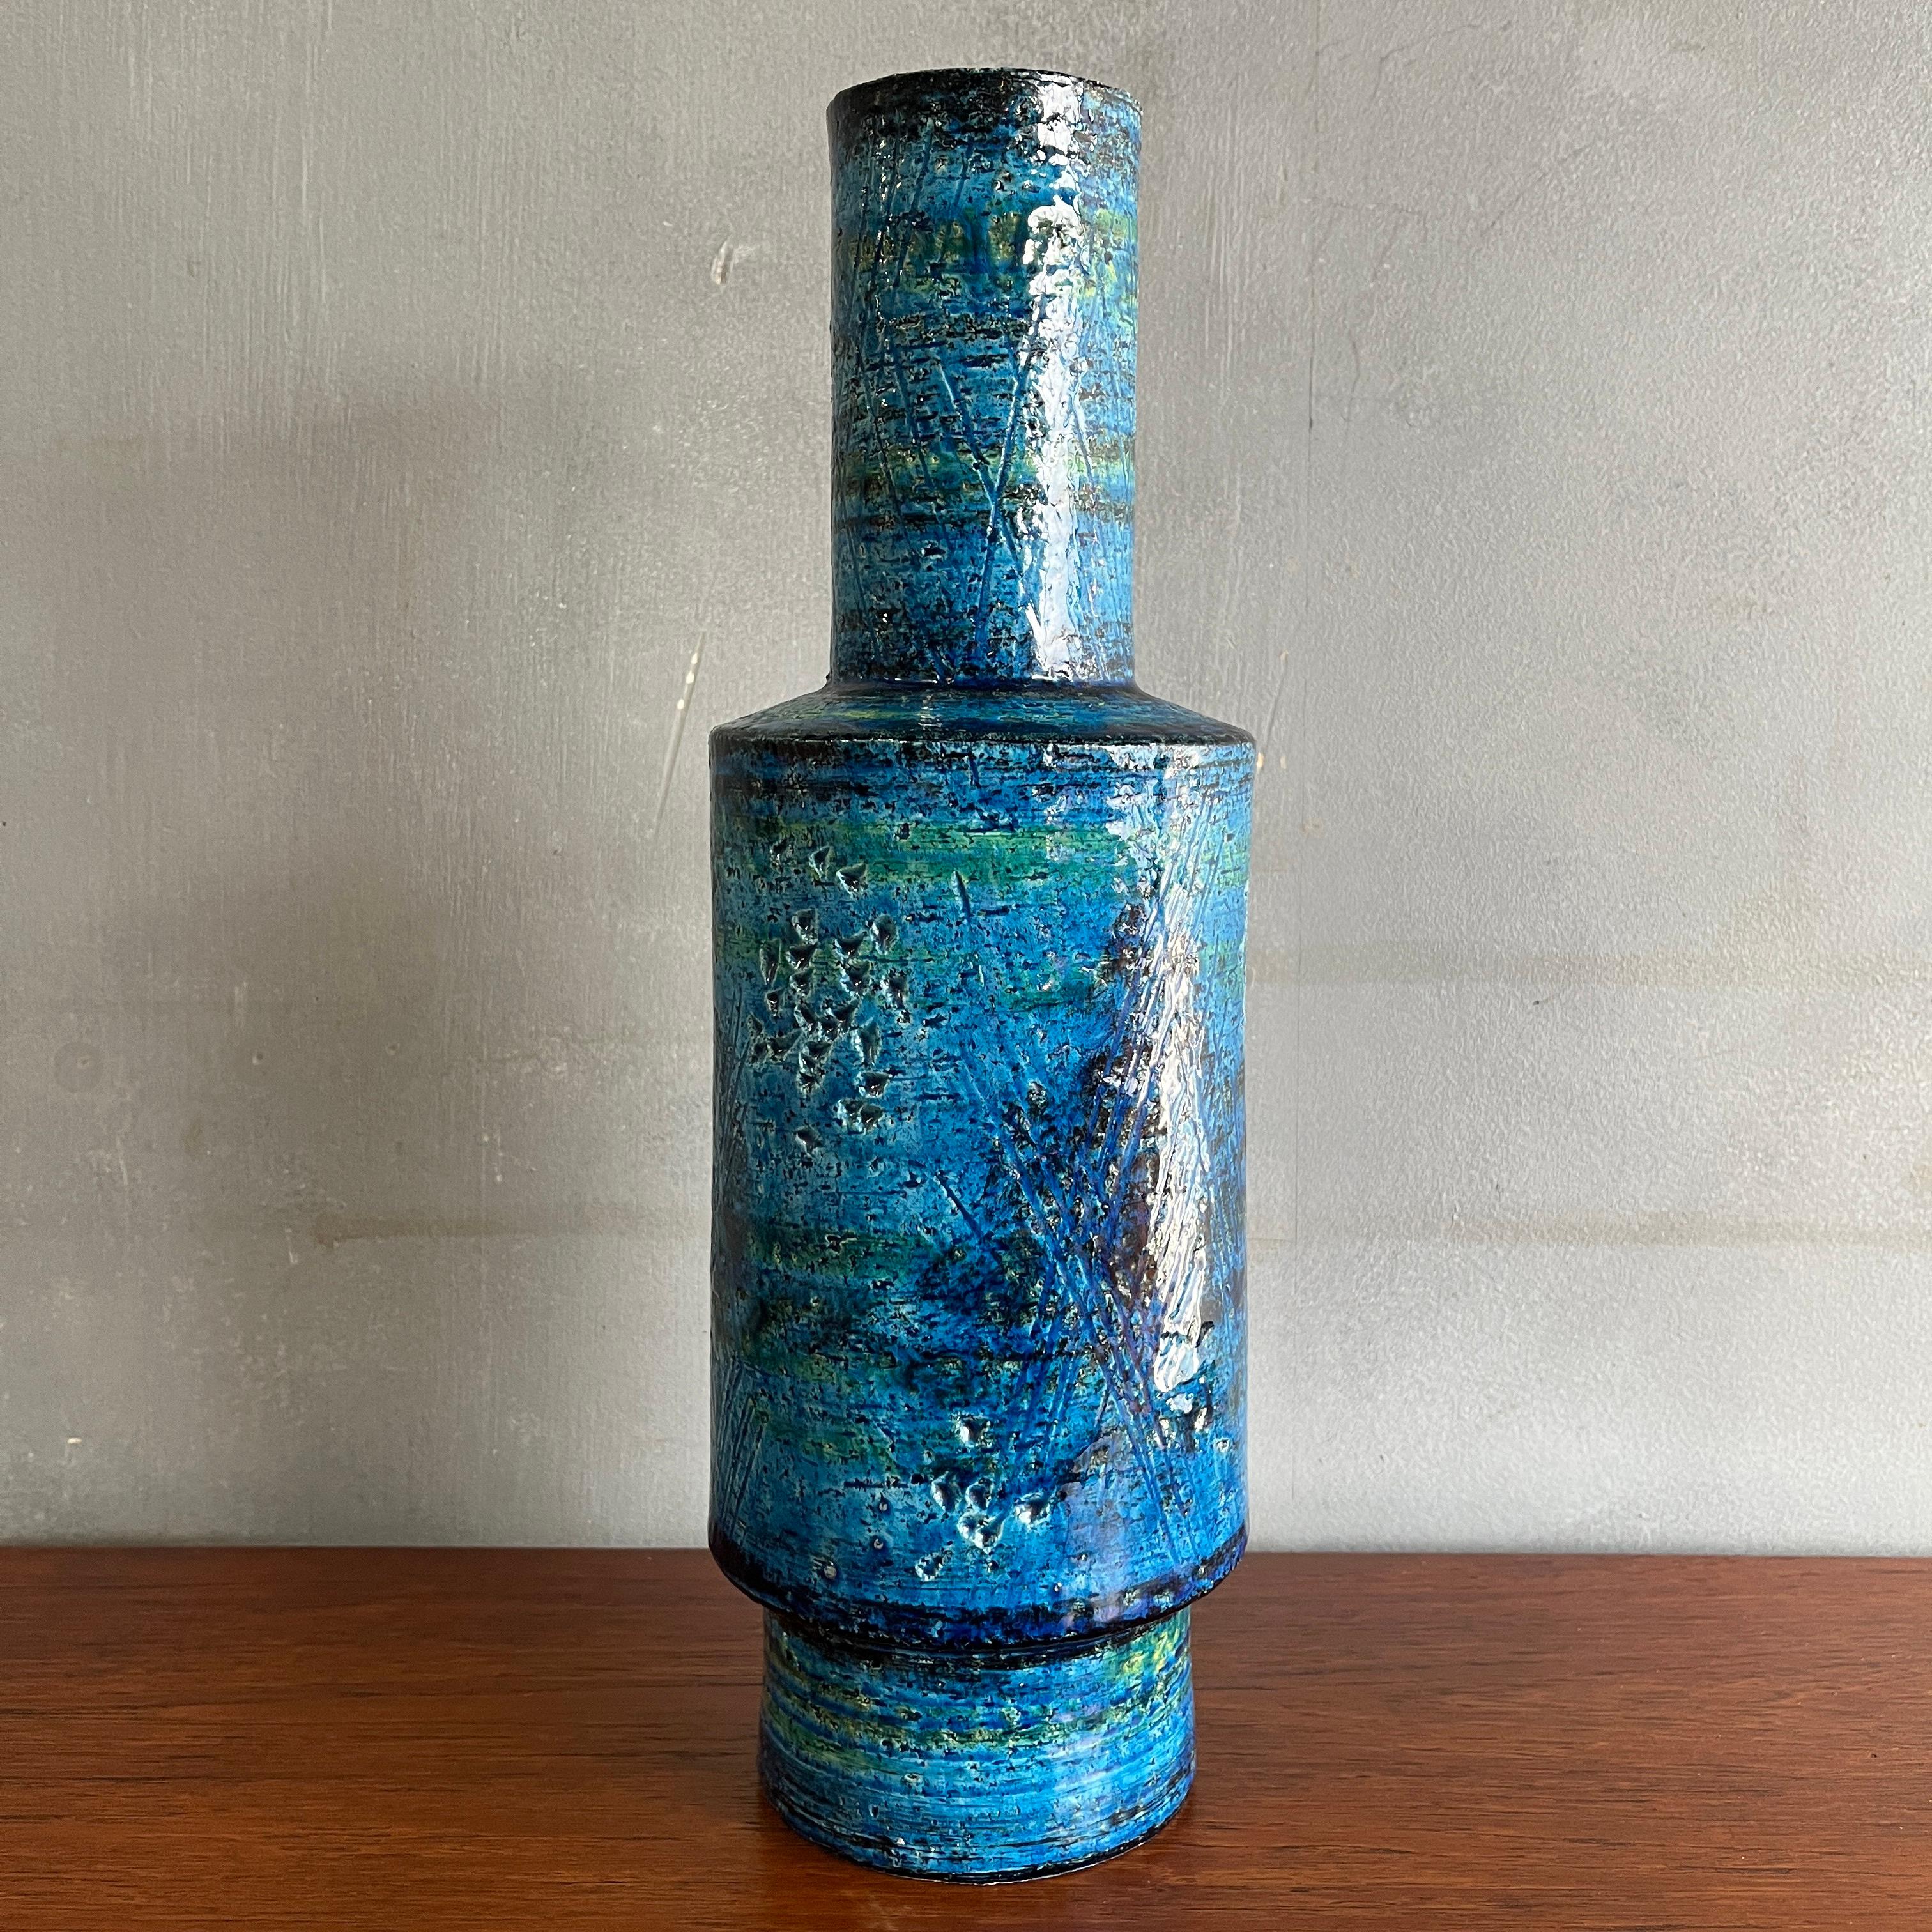 Very tall and unique vase. Rimini Blu series by Aldo Londi for Bitossi, Italy. This form has typically been made into a lamp, however this vase has no holes for wiring and left intact. Very clean with no chips and looks new having never held water.